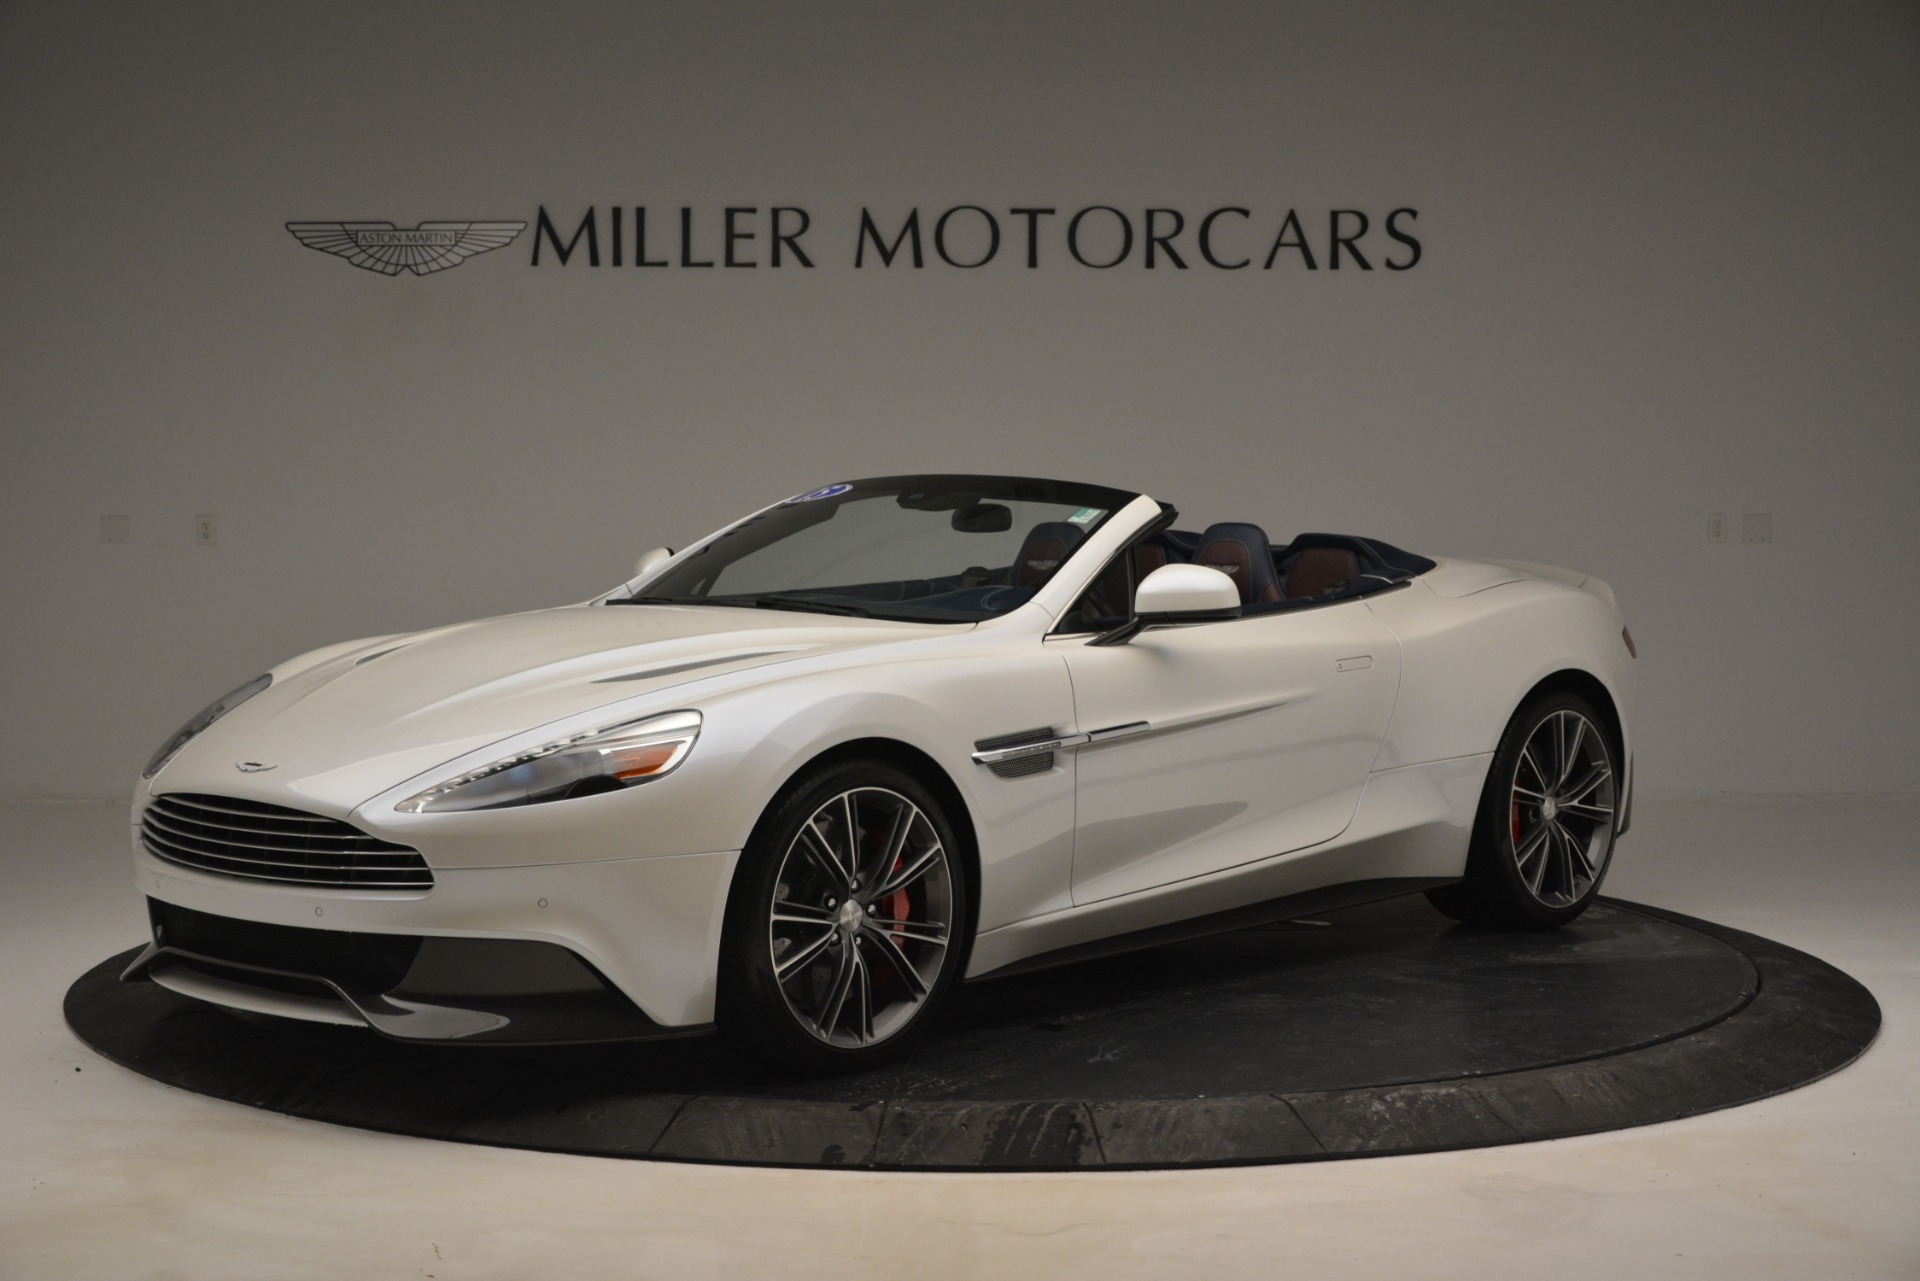 Used 2015 Aston Martin Vanquish Convertible for sale Sold at Bentley Greenwich in Greenwich CT 06830 1